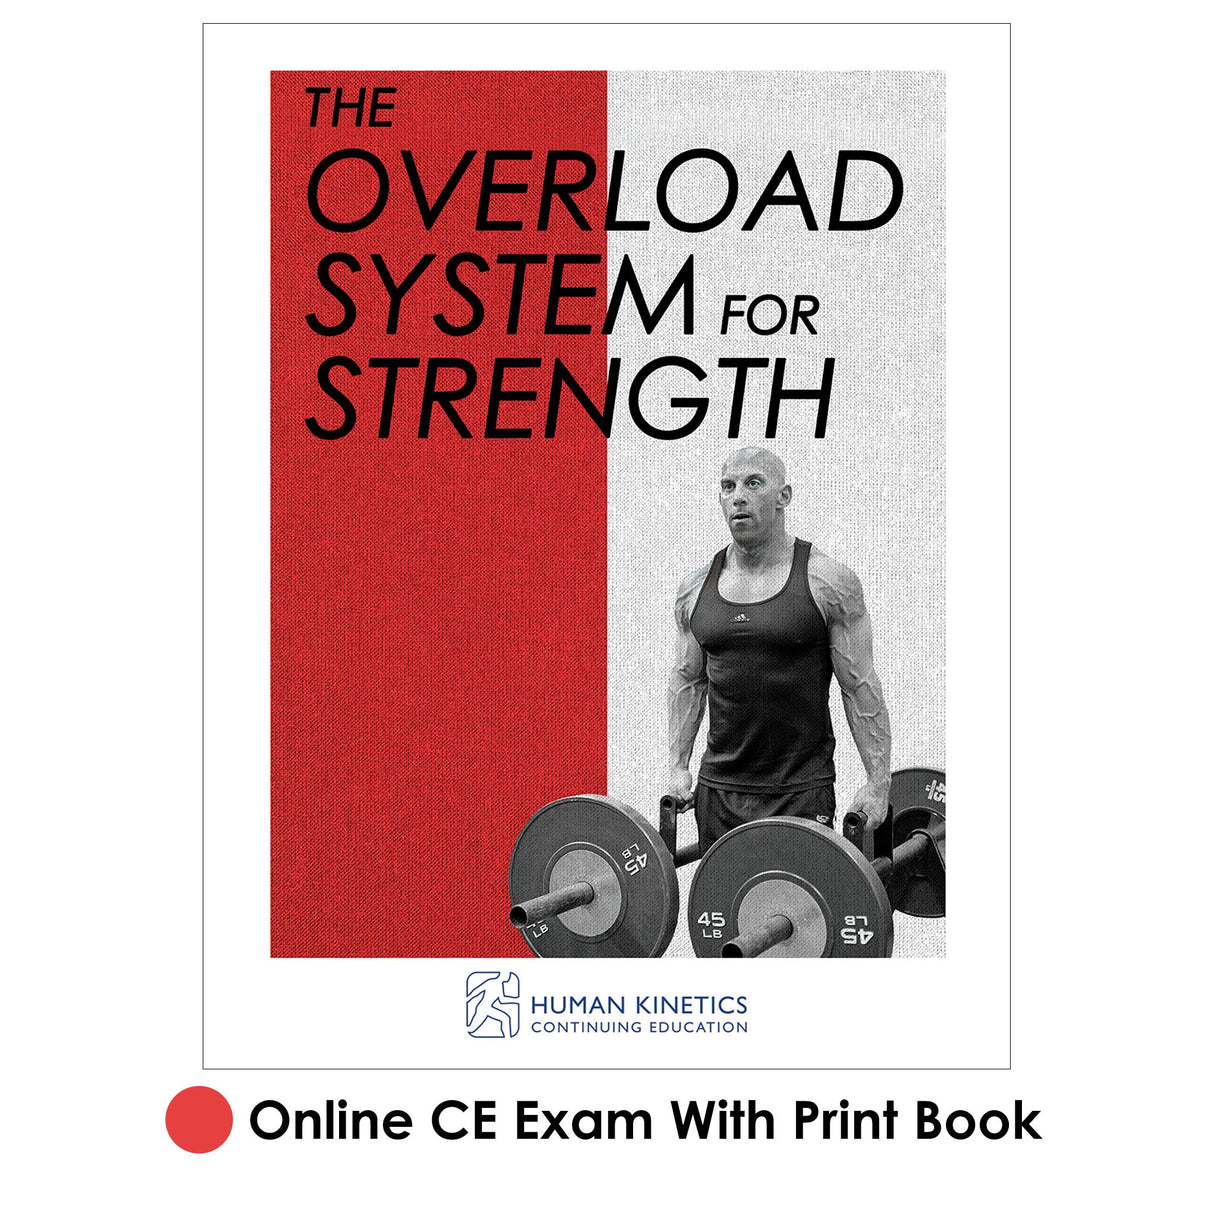 Overload System for Strength Online CE Exam With Print Book, The